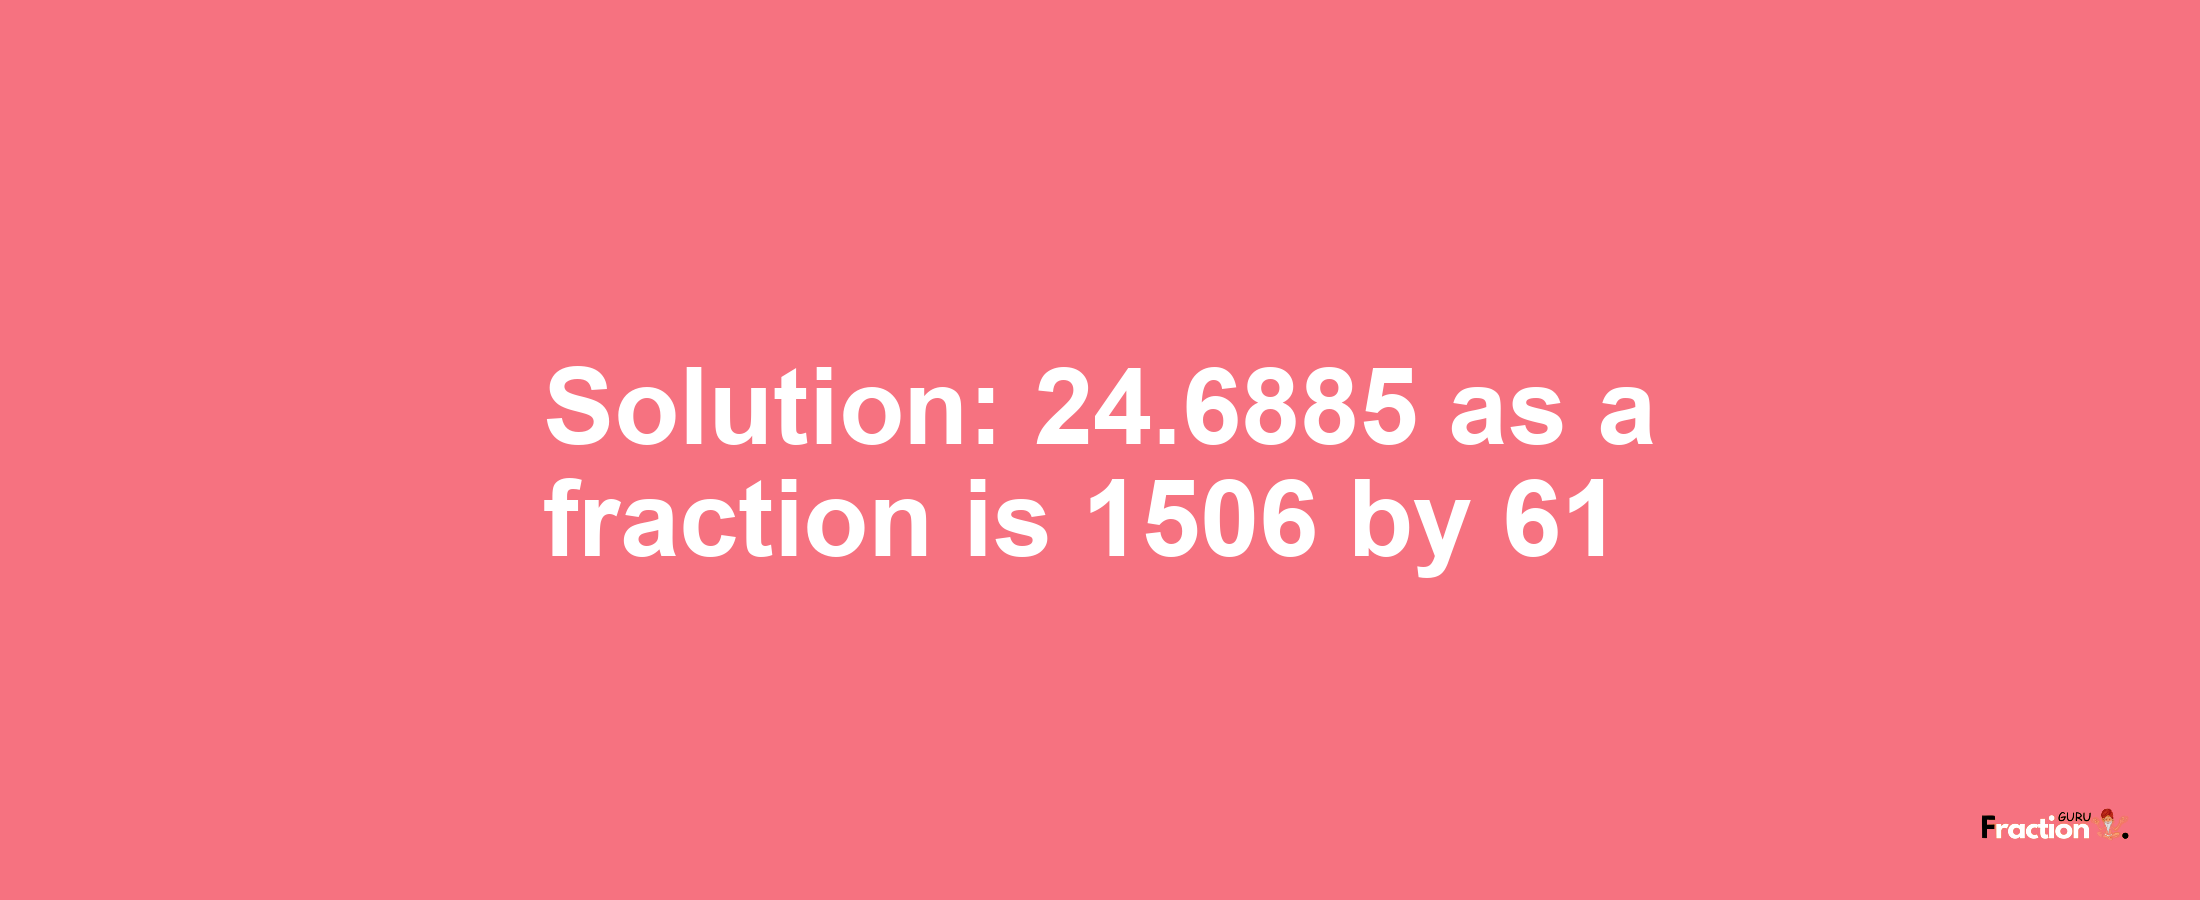 Solution:24.6885 as a fraction is 1506/61